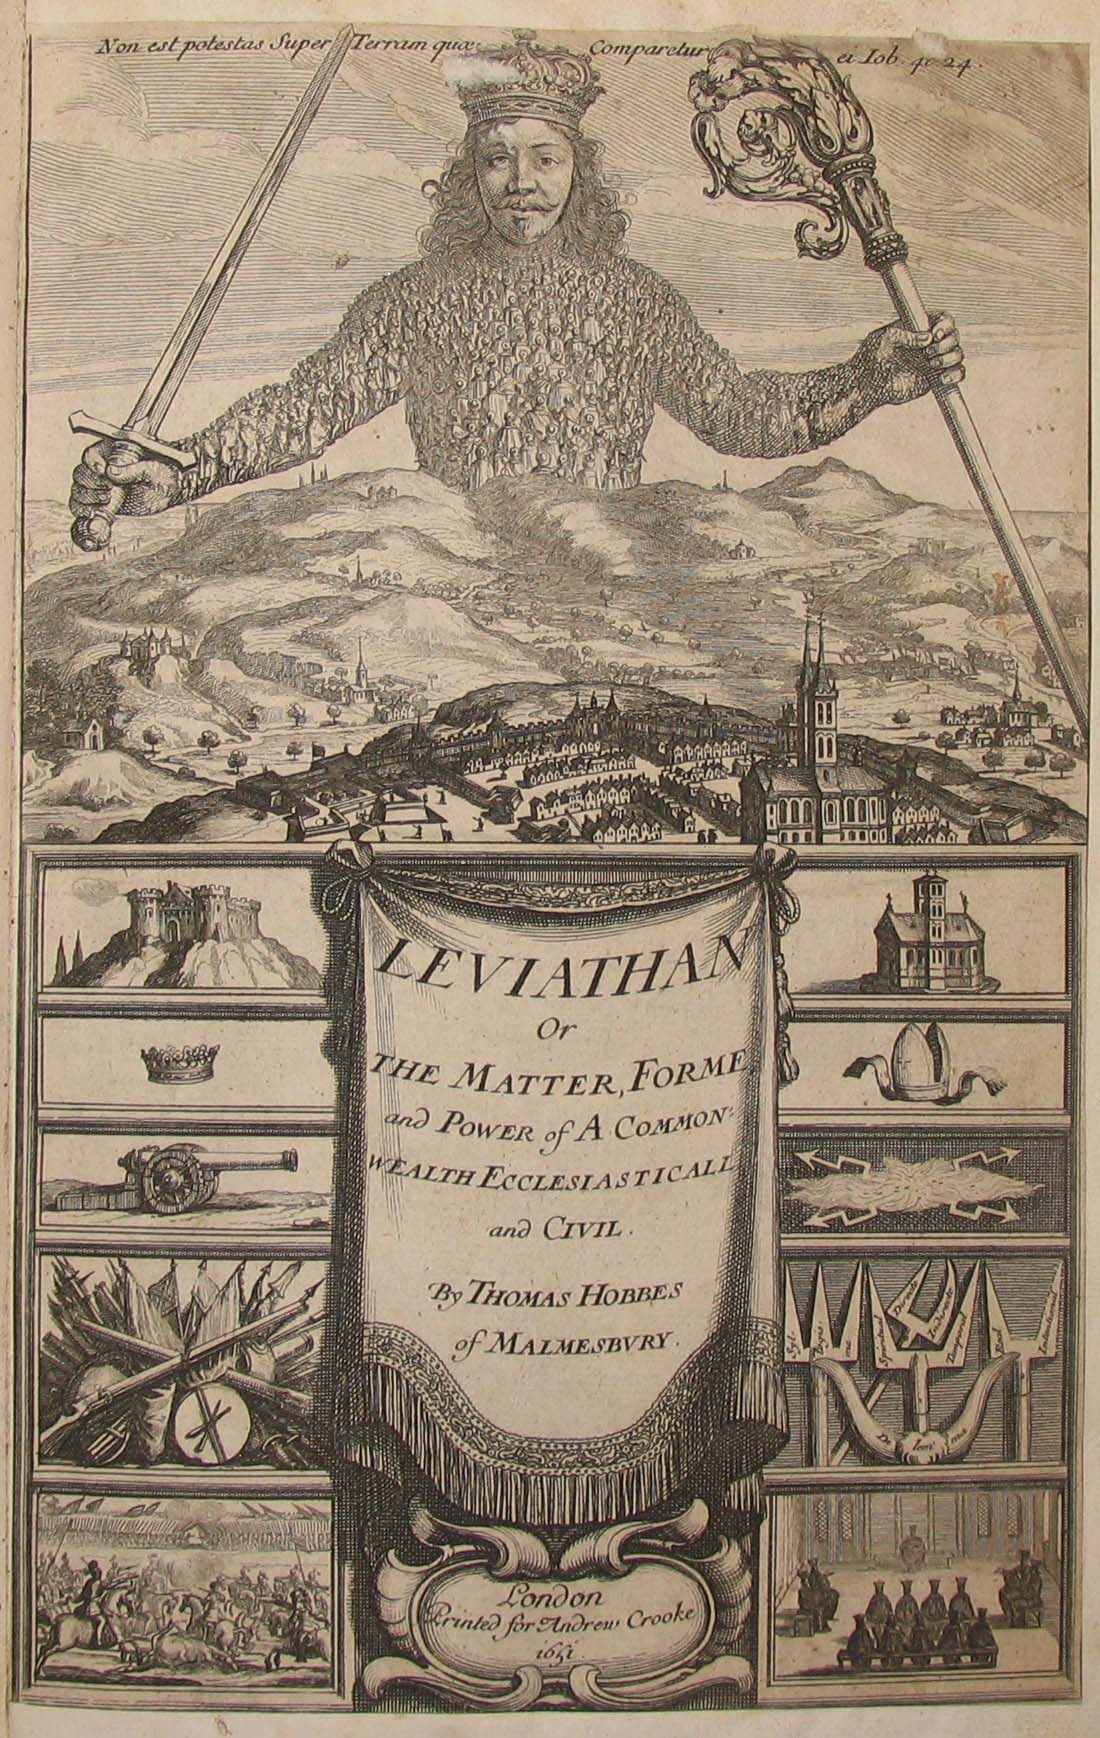 Frontispiece to the 1651 edition